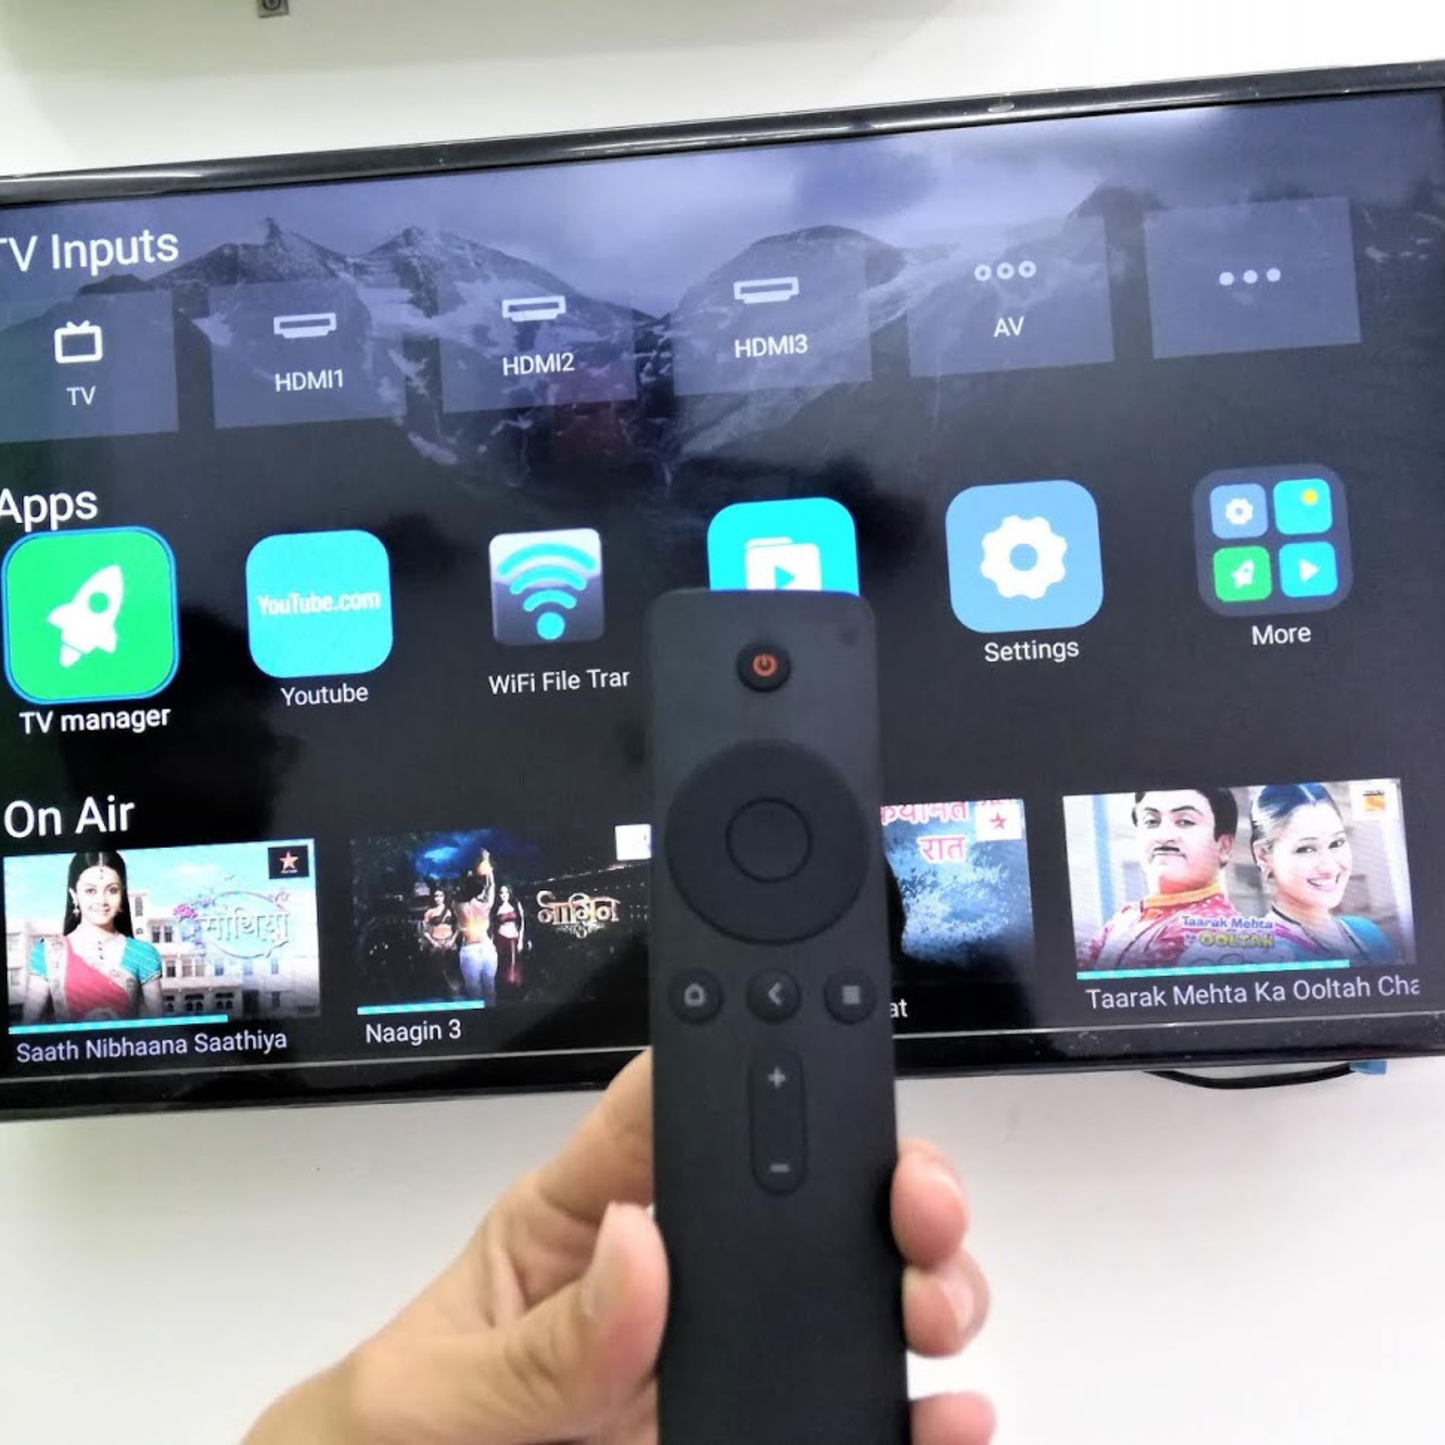 MI smart led tv remote with voice